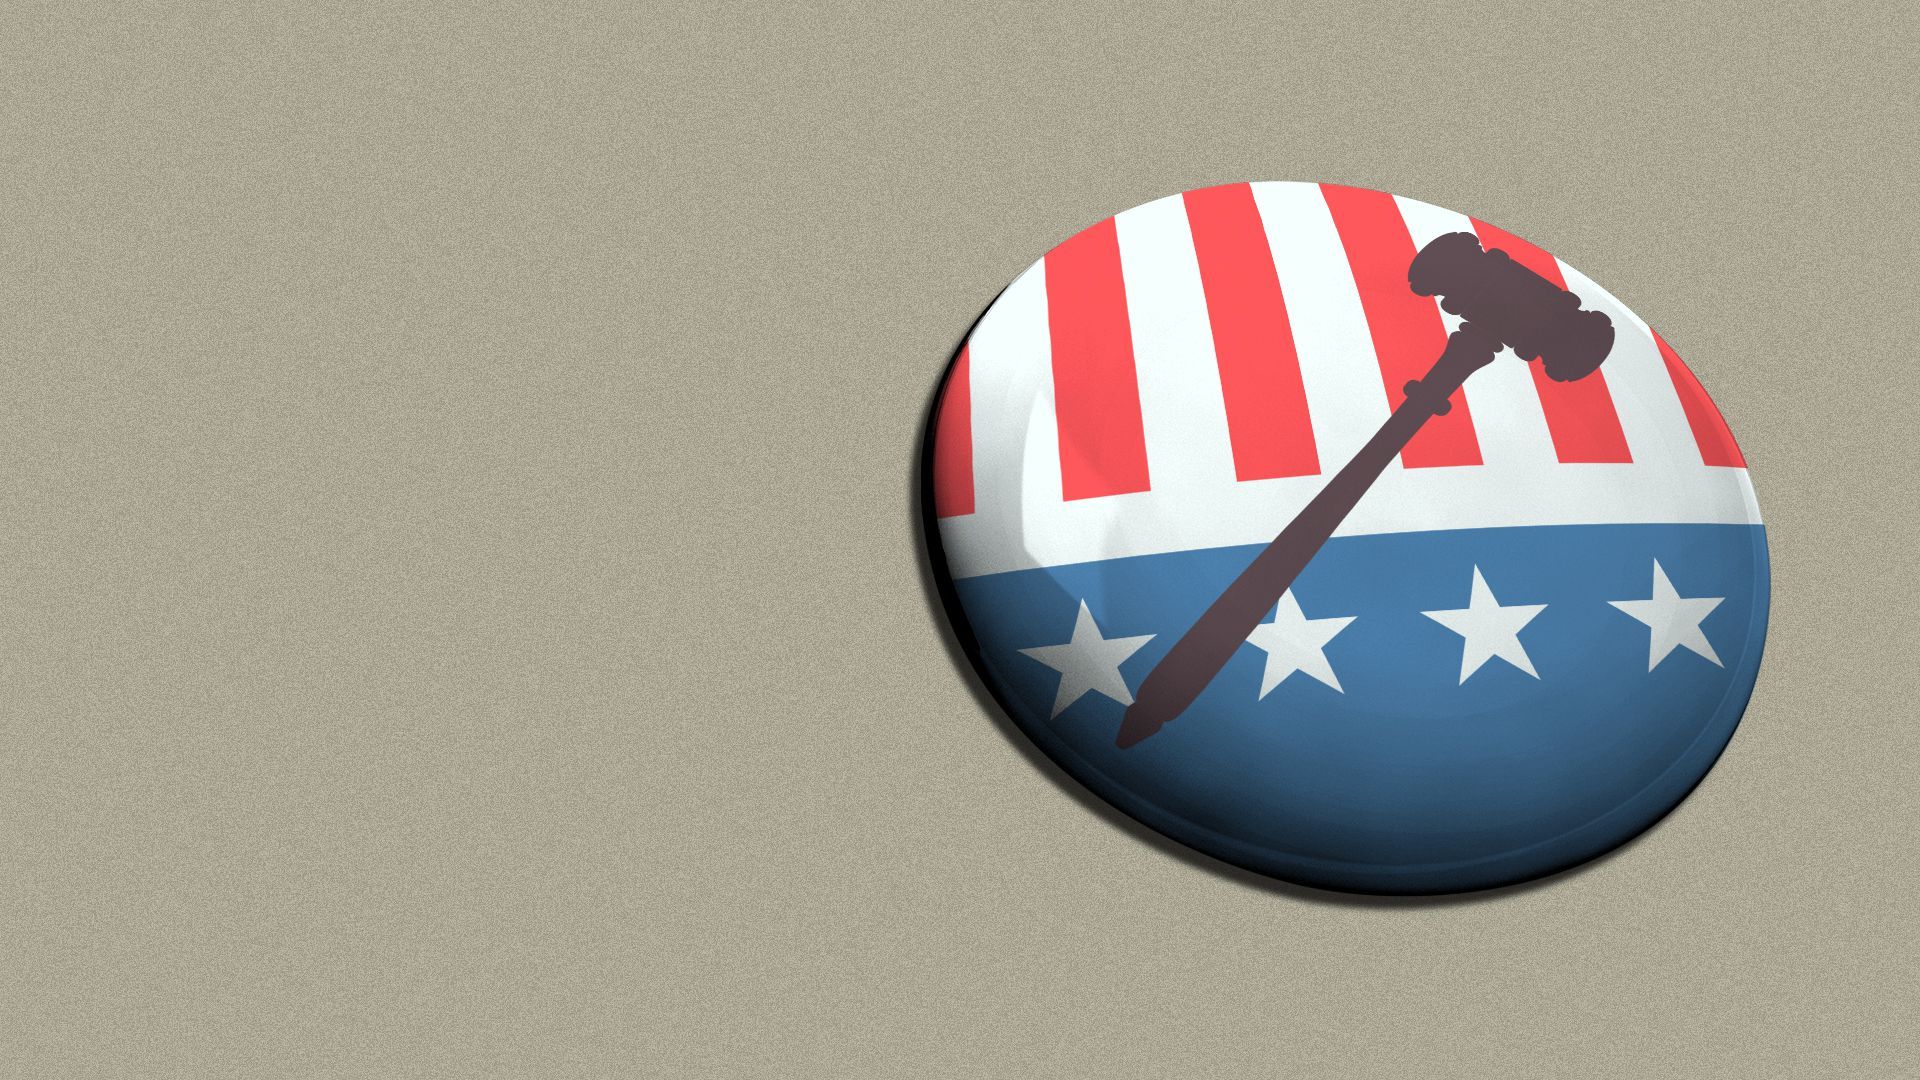 Illustration of a campaign button with a gavel on it.